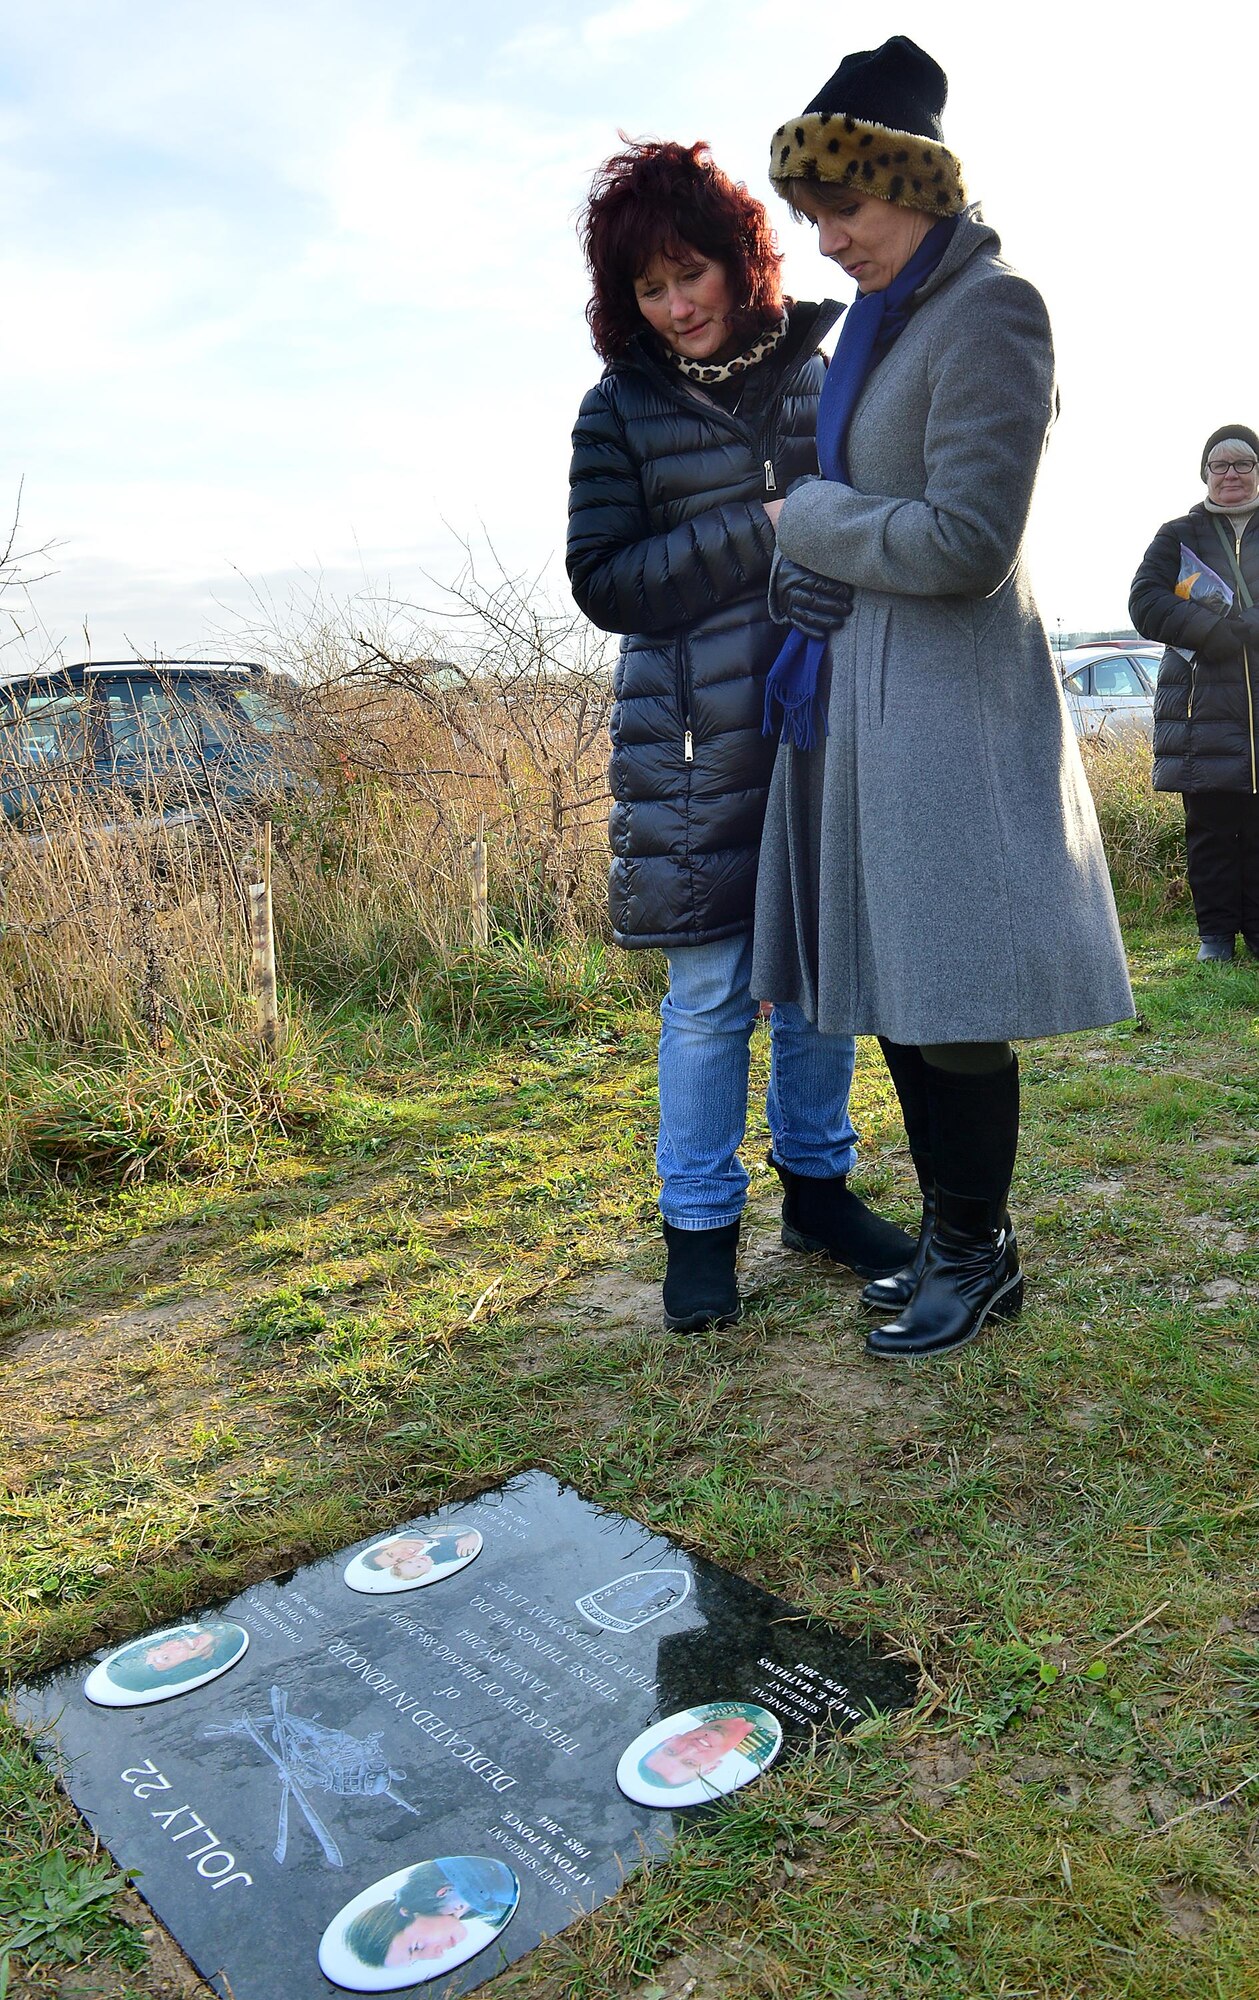 Marcia Ruane, mother of Capt. Sean Ruane, and Annette Hudson, Eastern Daily Press graphic journalist, view the memorial stone following the dedication ceremony Jan. 6, 2017. Hudson designed the memorial stone dedicated to the four fallen Airmen of Jolly 22 who perished on Jan. 7, 2014. (U.S. Air Force photo/Staff Sgt. Stephanie Longoria)